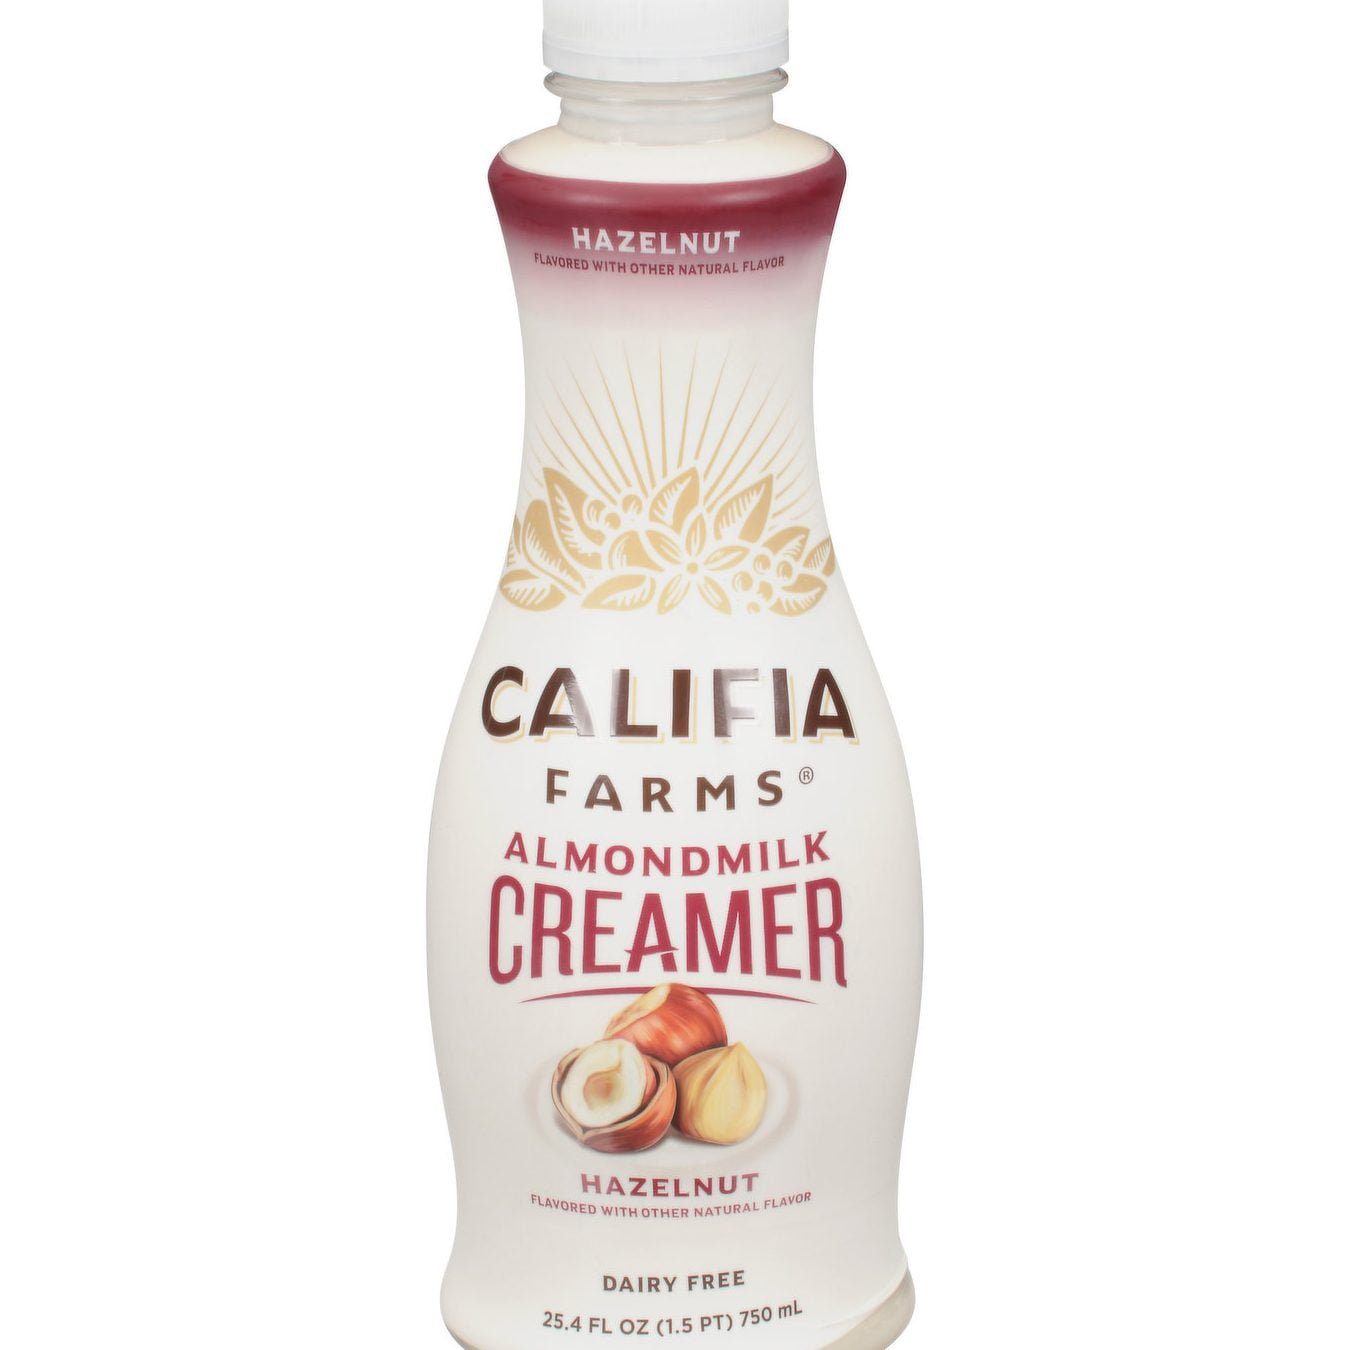 Califia farms: A company that produces and sells plant-based beverages and other food products, with a focus on sustainability and health.